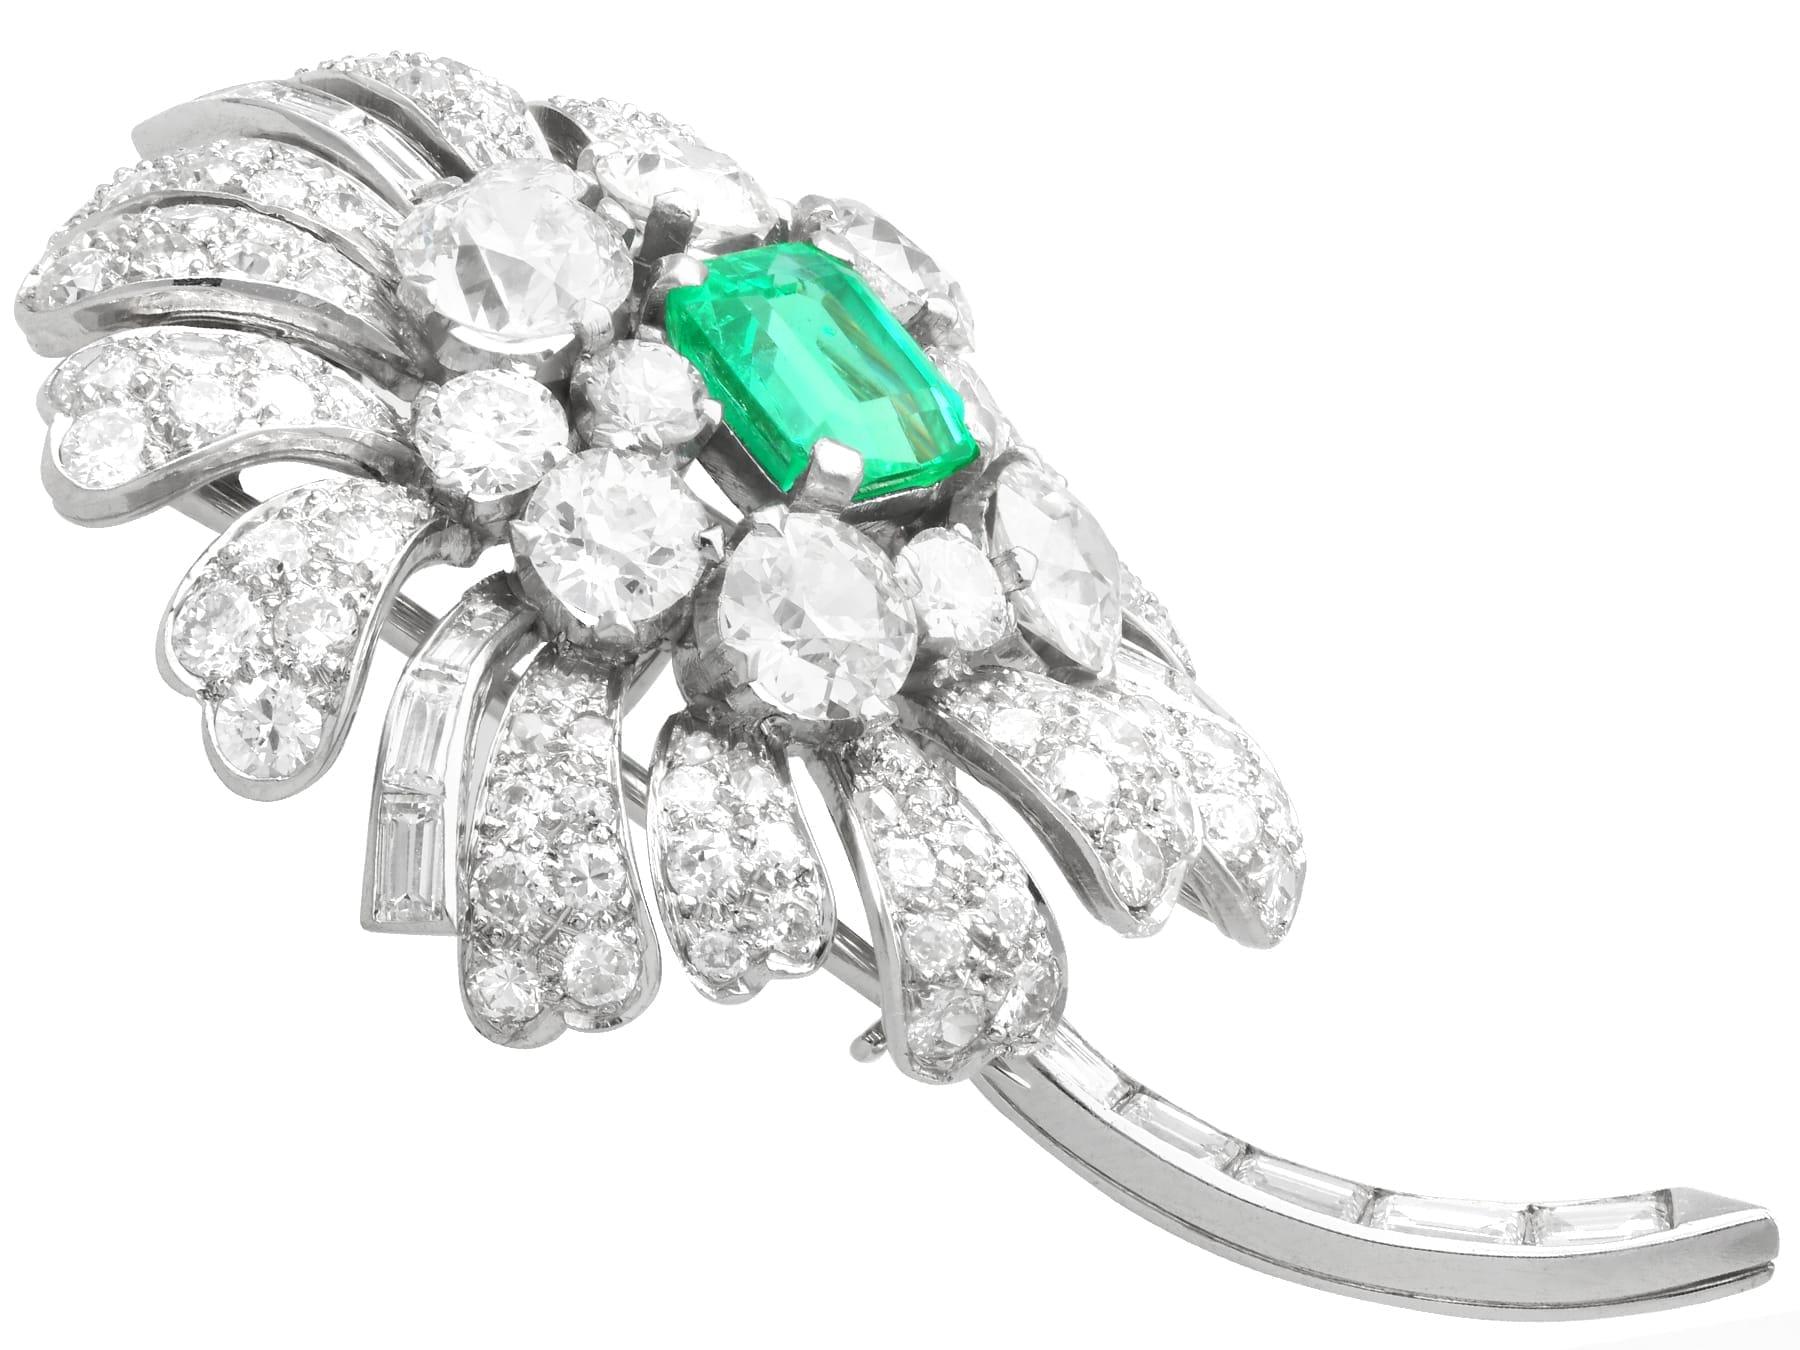 Women's or Men's Antique 2.10Ct Emerald and 7.73Ct Diamond Platinum Floral Brooch Circa 1900 For Sale